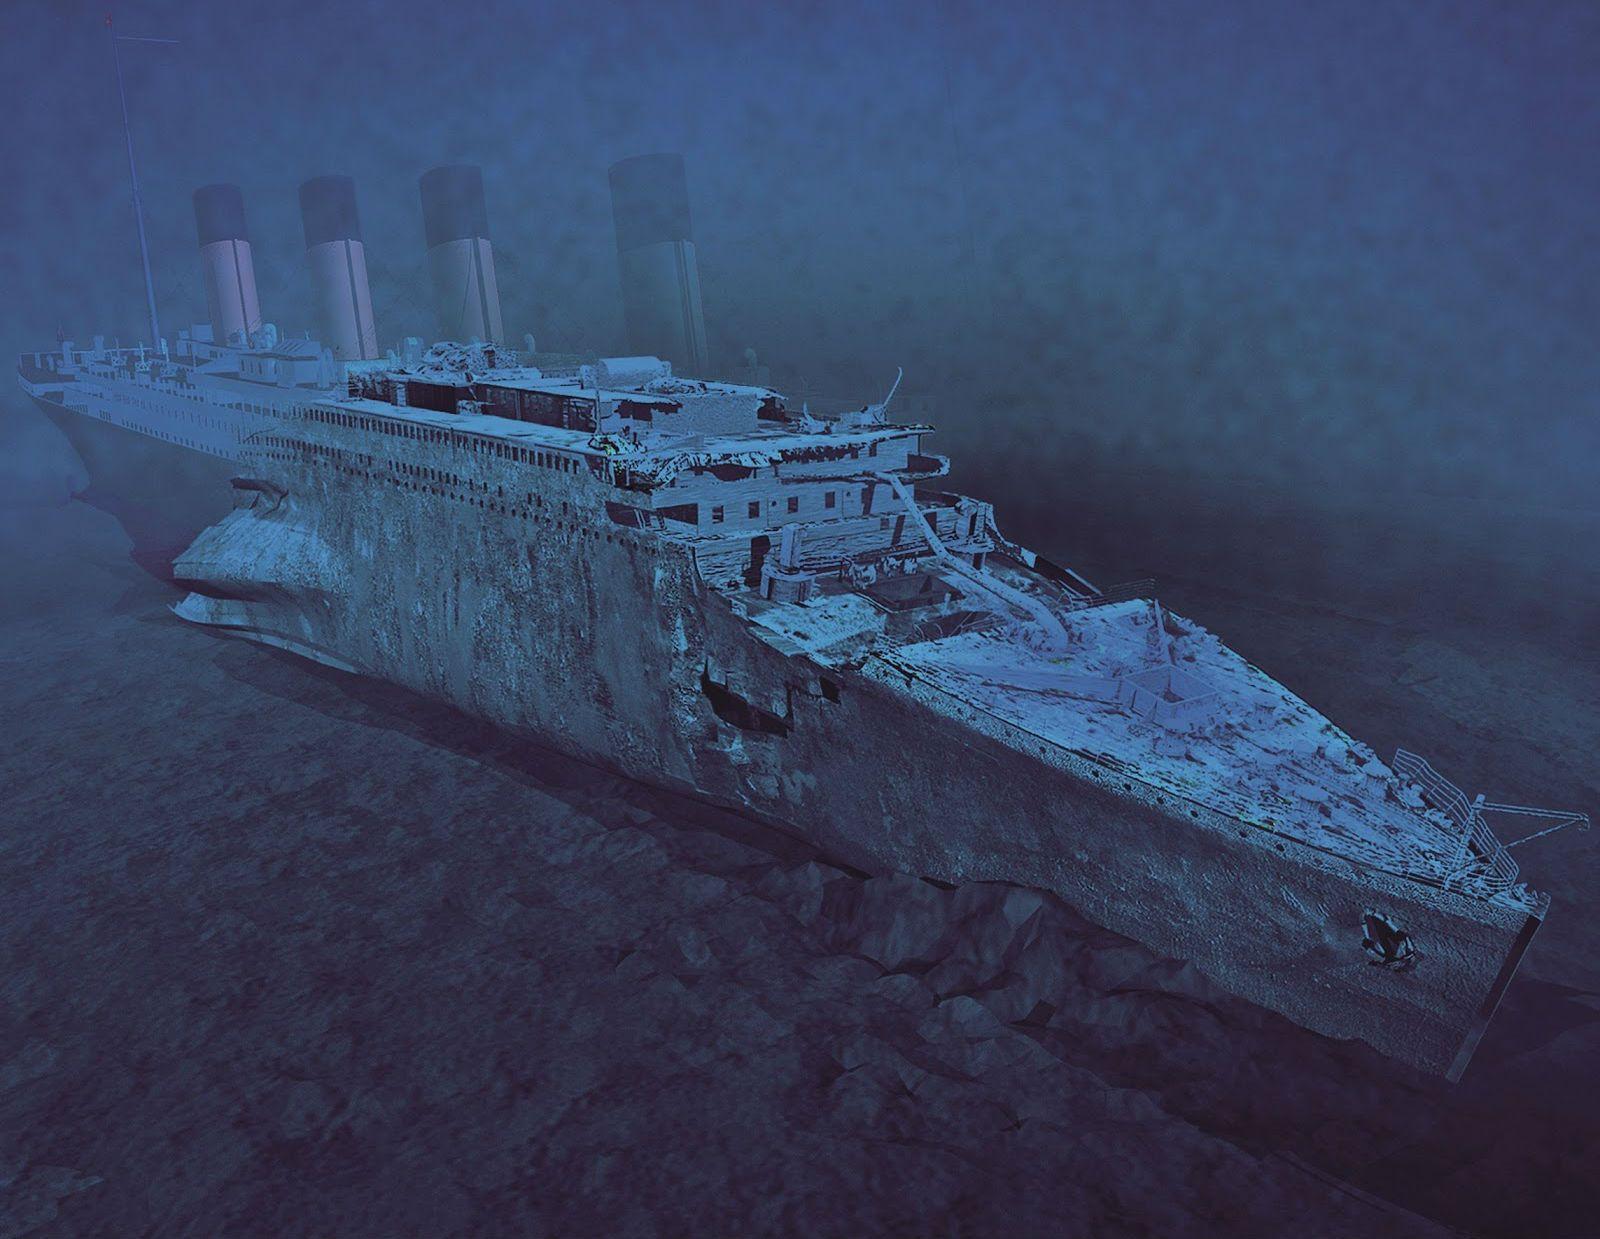 The wreckage of the Titanic at the bottom of wallpaper and image